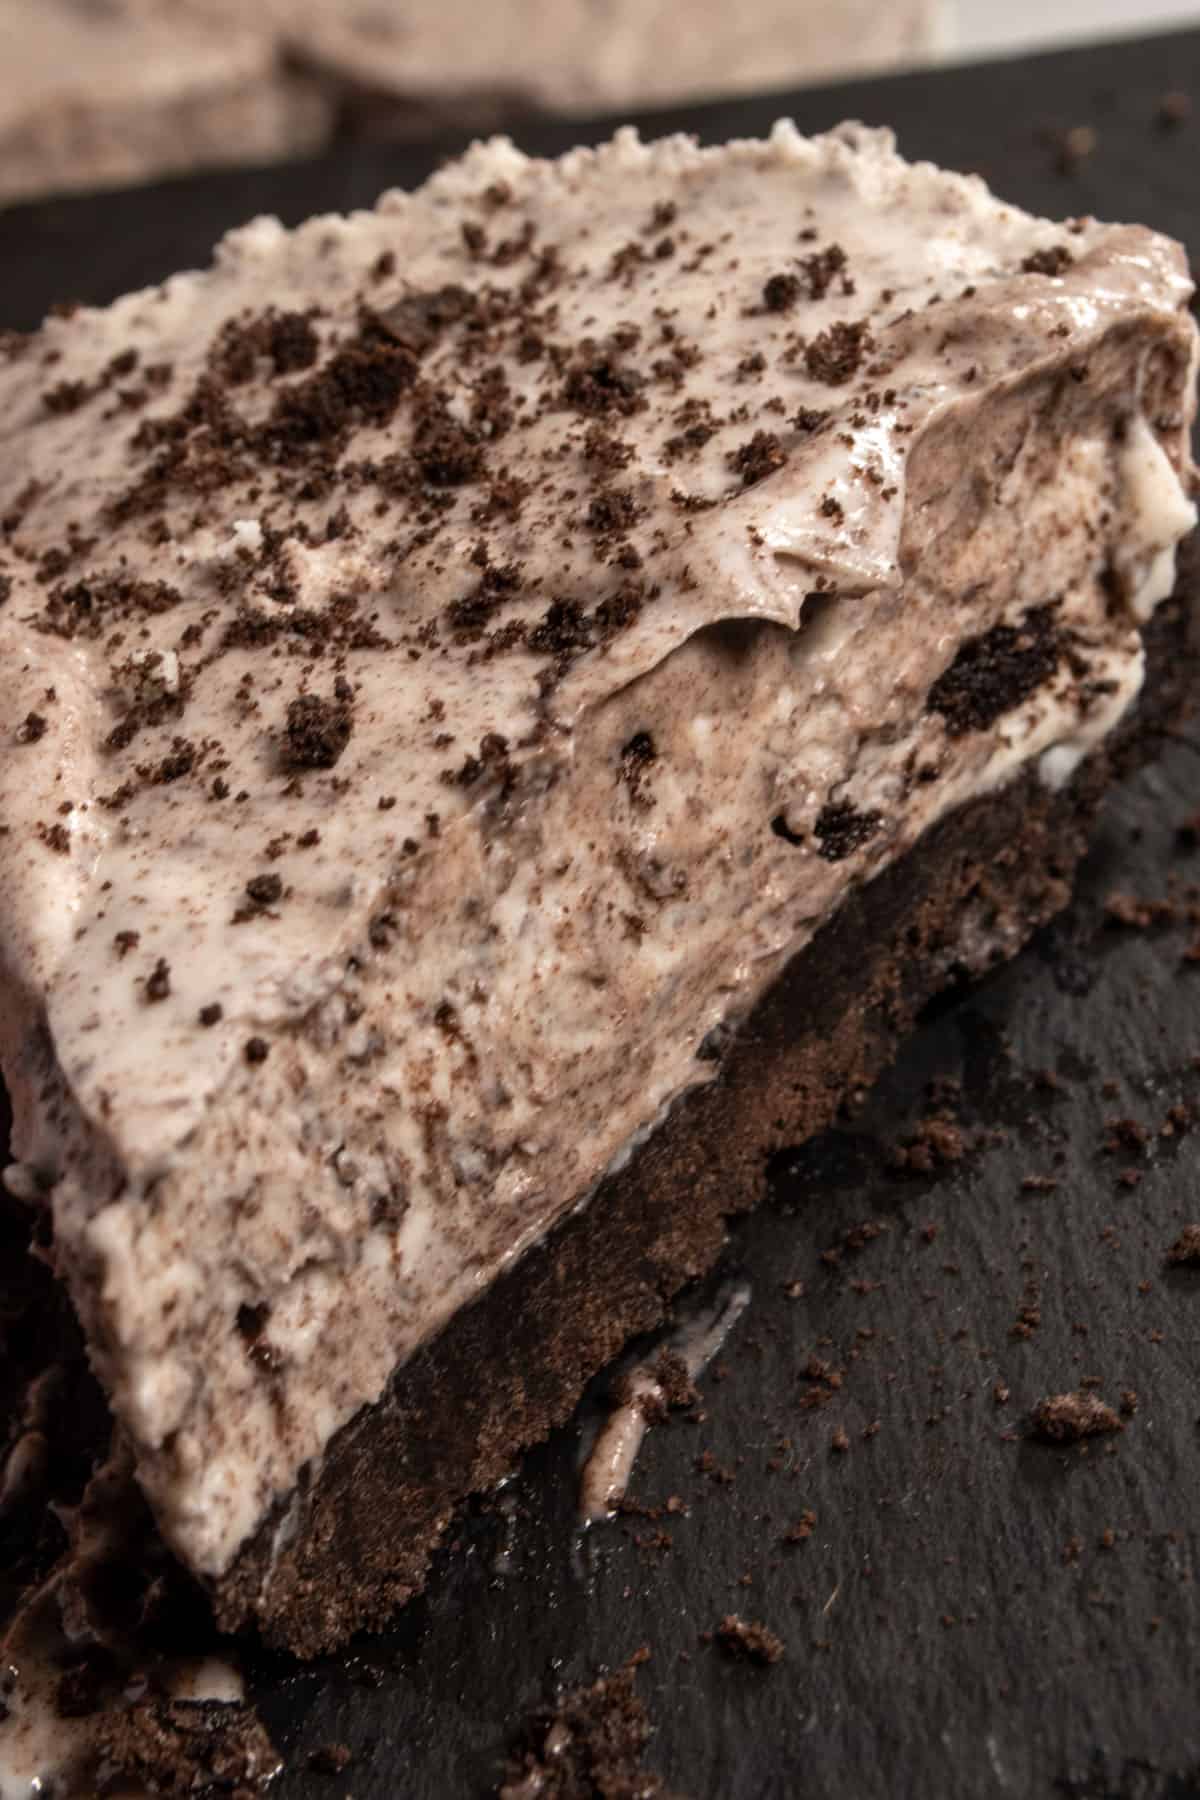 A close up image of a slice of cheesecake. It is silky smooth.